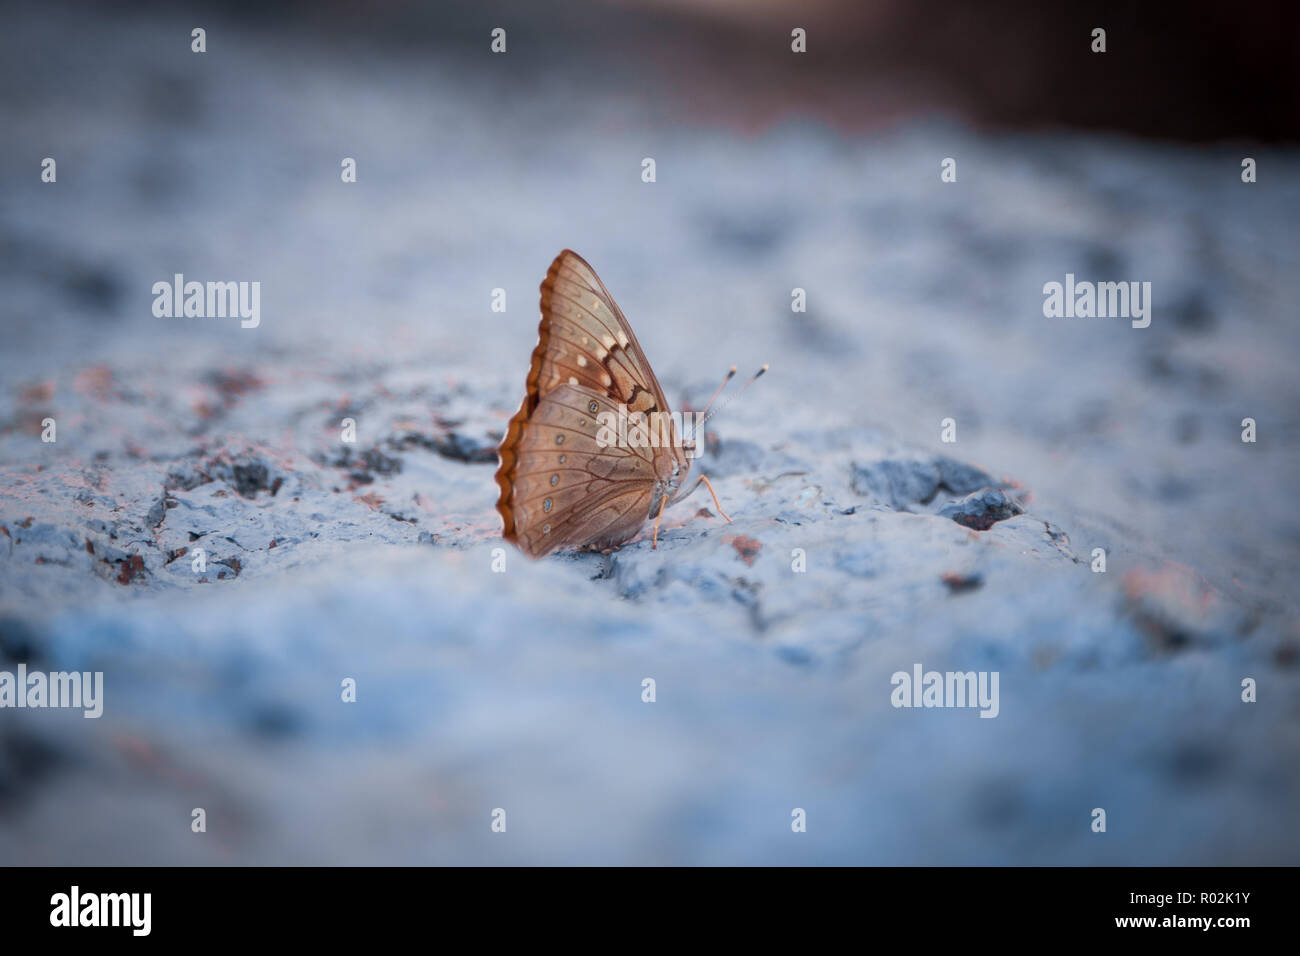 Butterfly opening and closing wings on a rock. Stock Photo